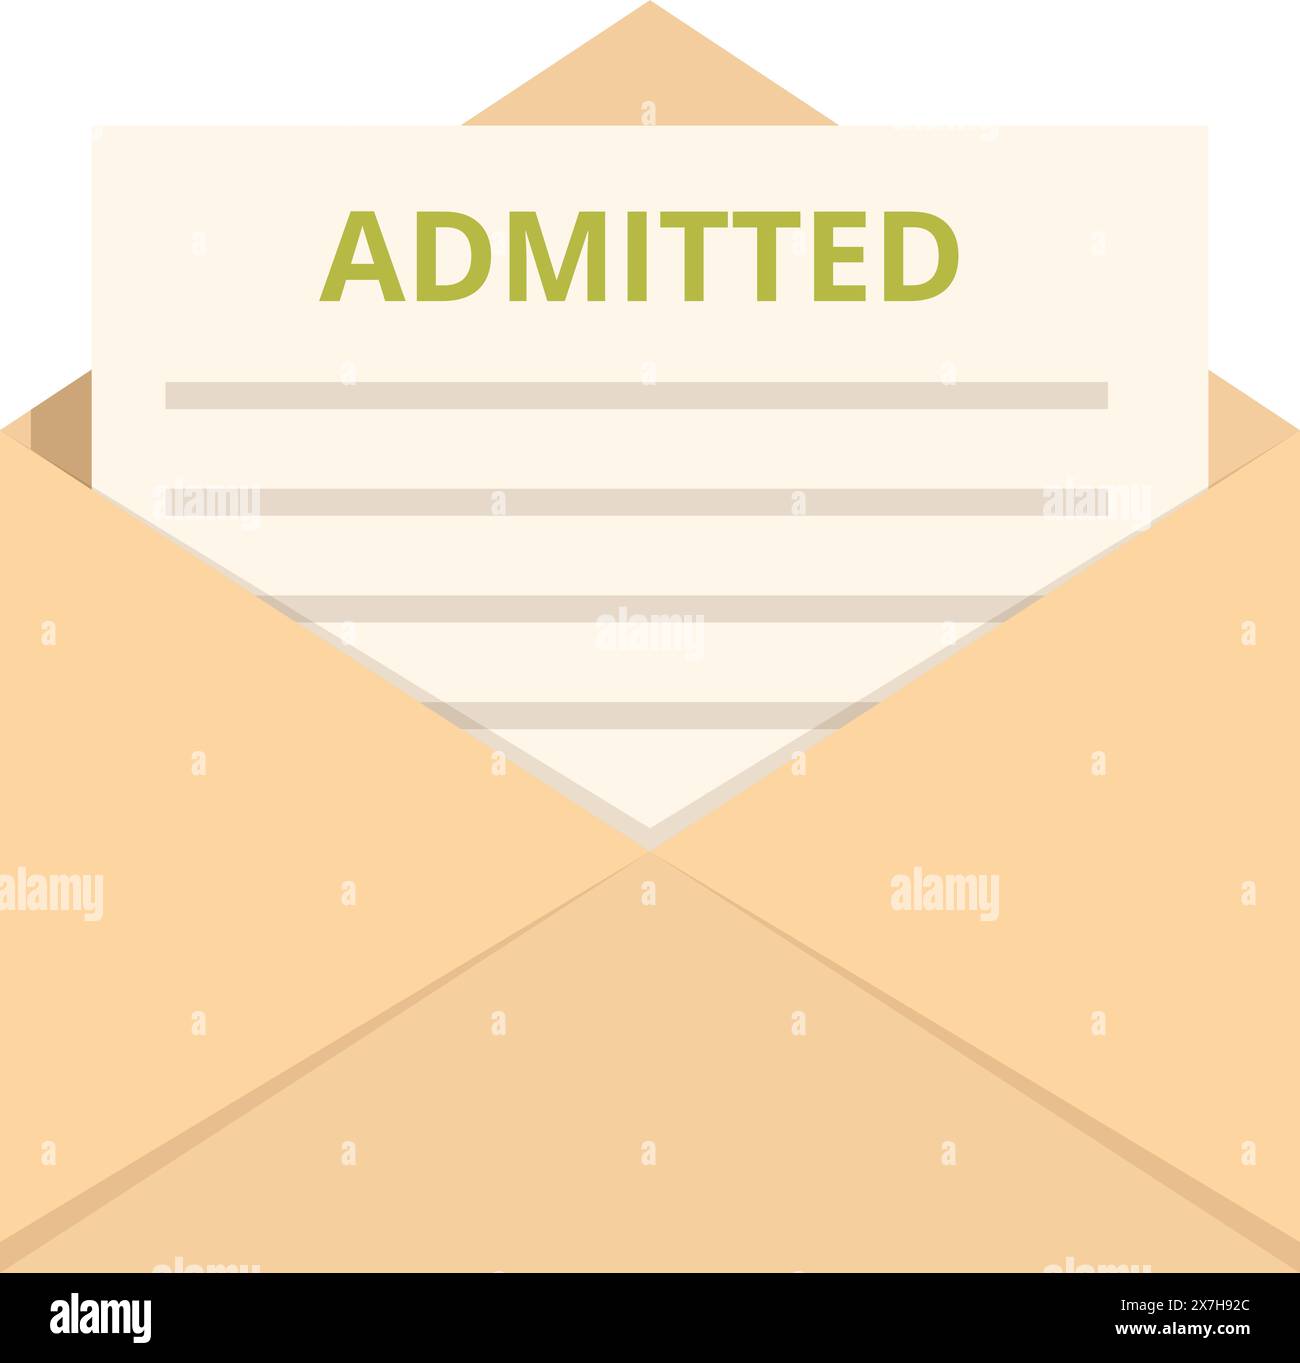 Flat design of an open envelope with an admitted letter, symbolizing college acceptance Stock Vector